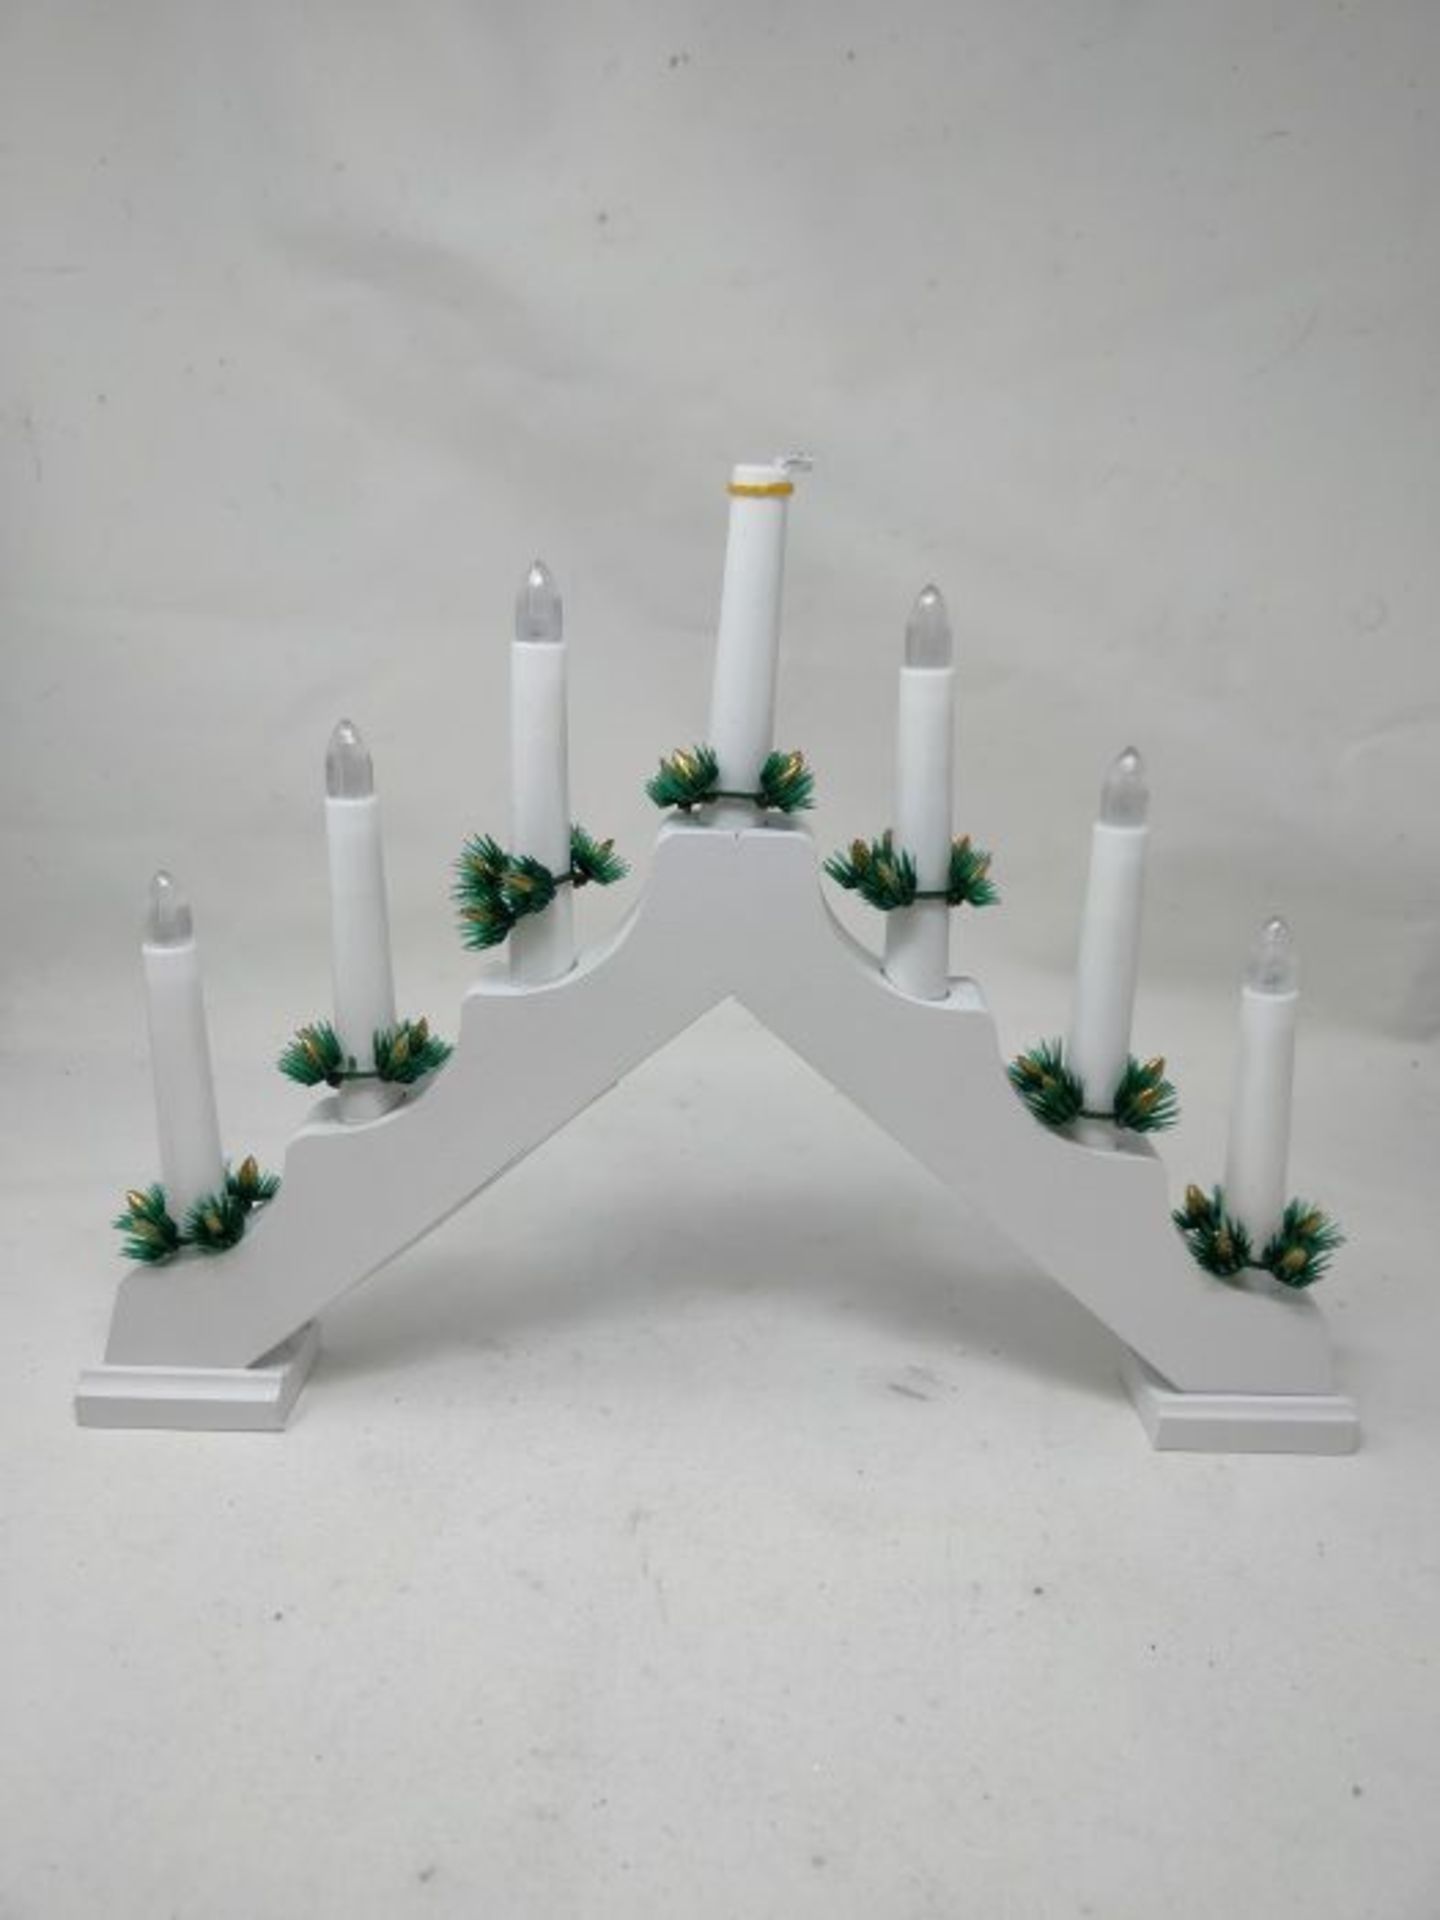 com-four® LED candle arch as Christmas lighting - candle bridge with 7 LEDs - light a - Image 3 of 3